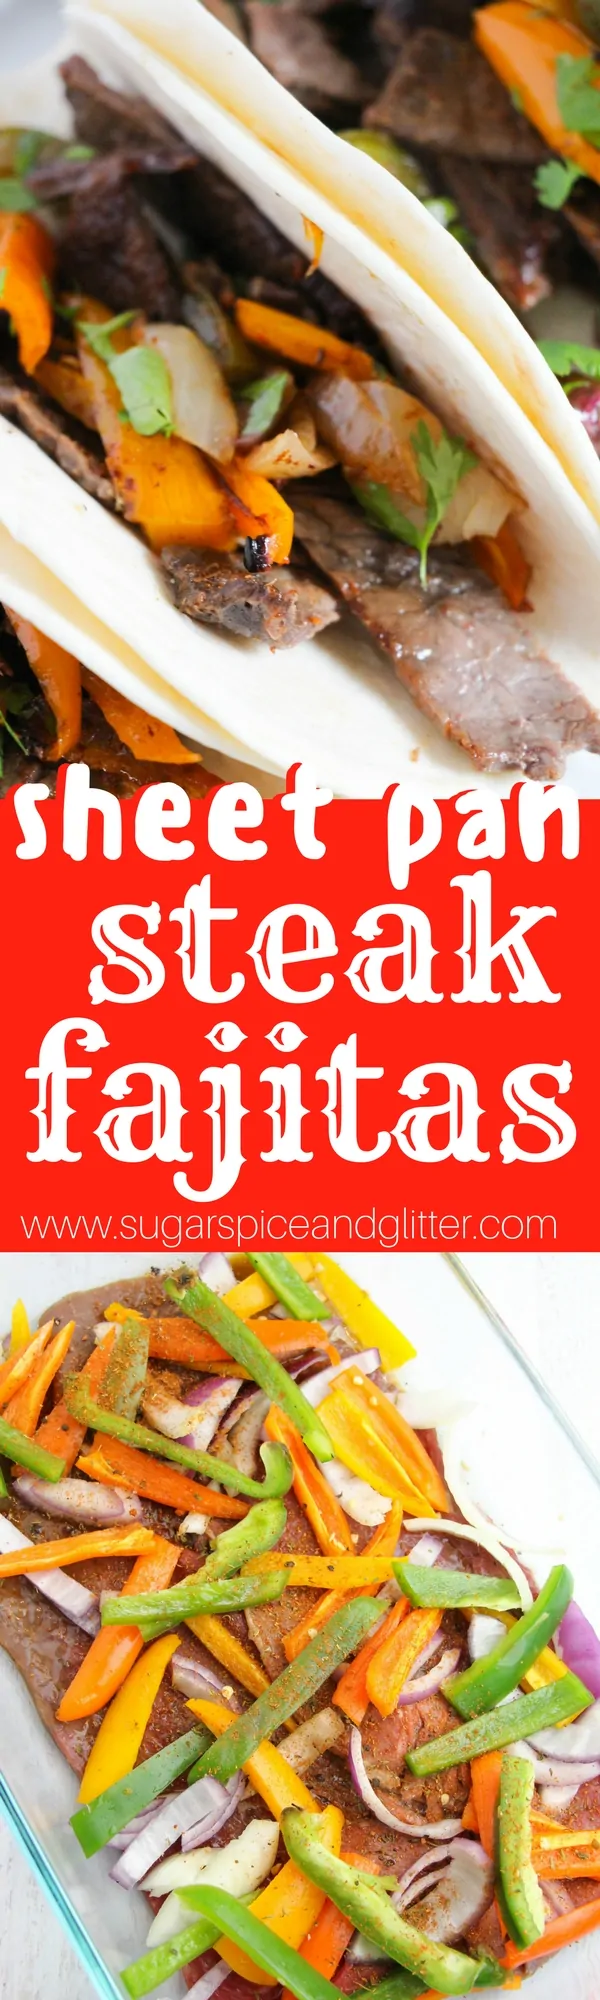 Easy sheet pan steak fajitas - delicious, flavorful steak fajitas with minimal effort. Prep this recipe the night before and just pop it in the oven 20 minutes before supper! Veg and protein packed